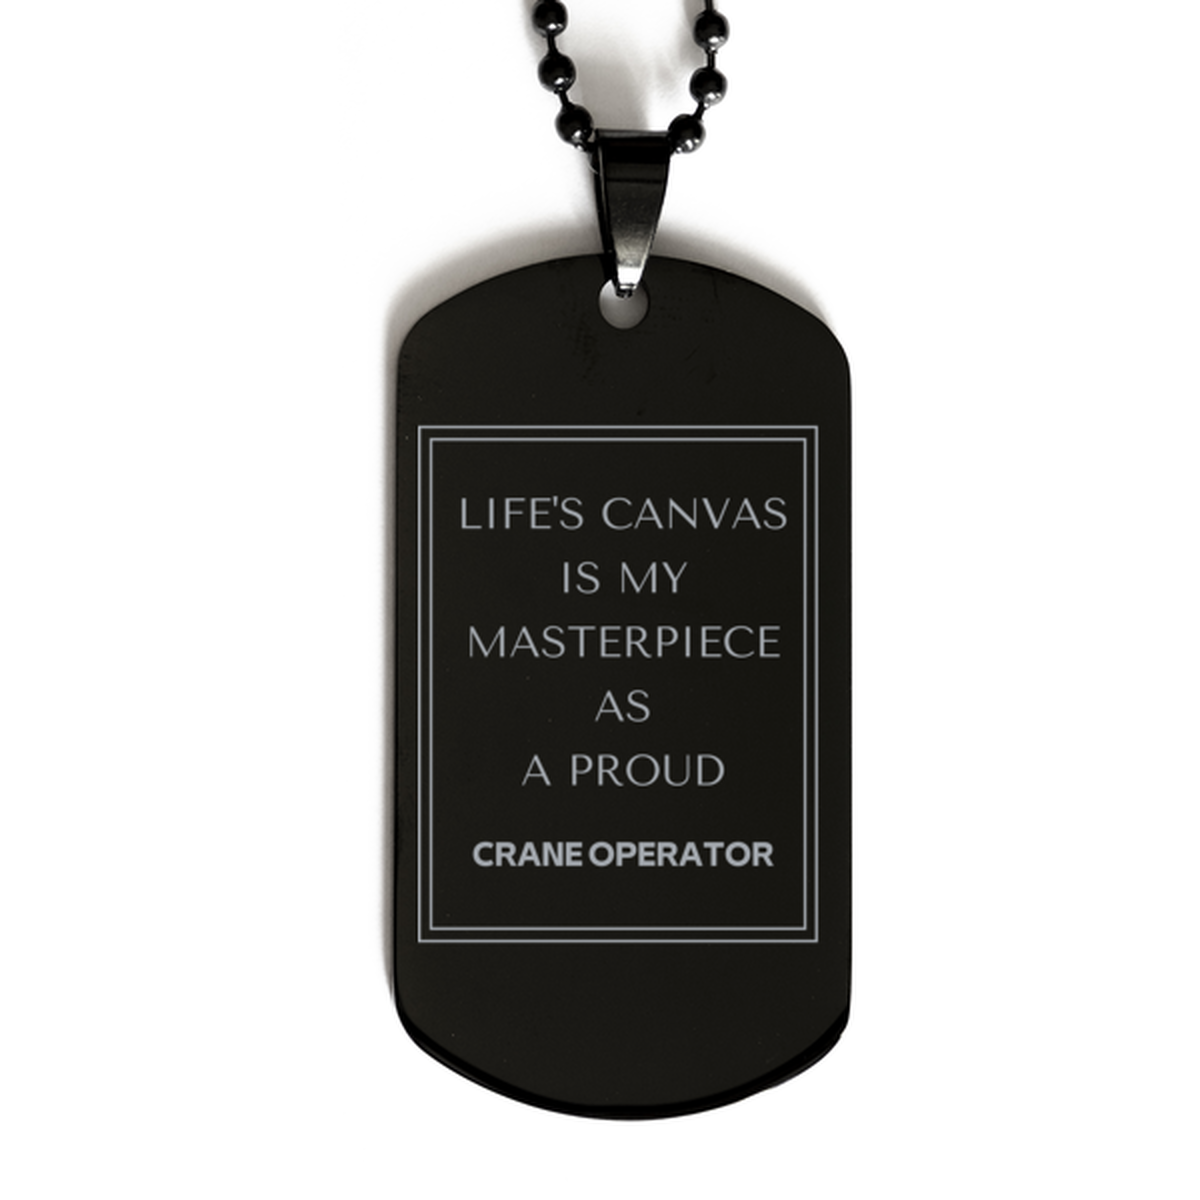 Proud Crane Operator Gifts, Life's canvas is my masterpiece, Epic Birthday Christmas Unique Black Dog Tag For Crane Operator, Coworkers, Men, Women, Friends